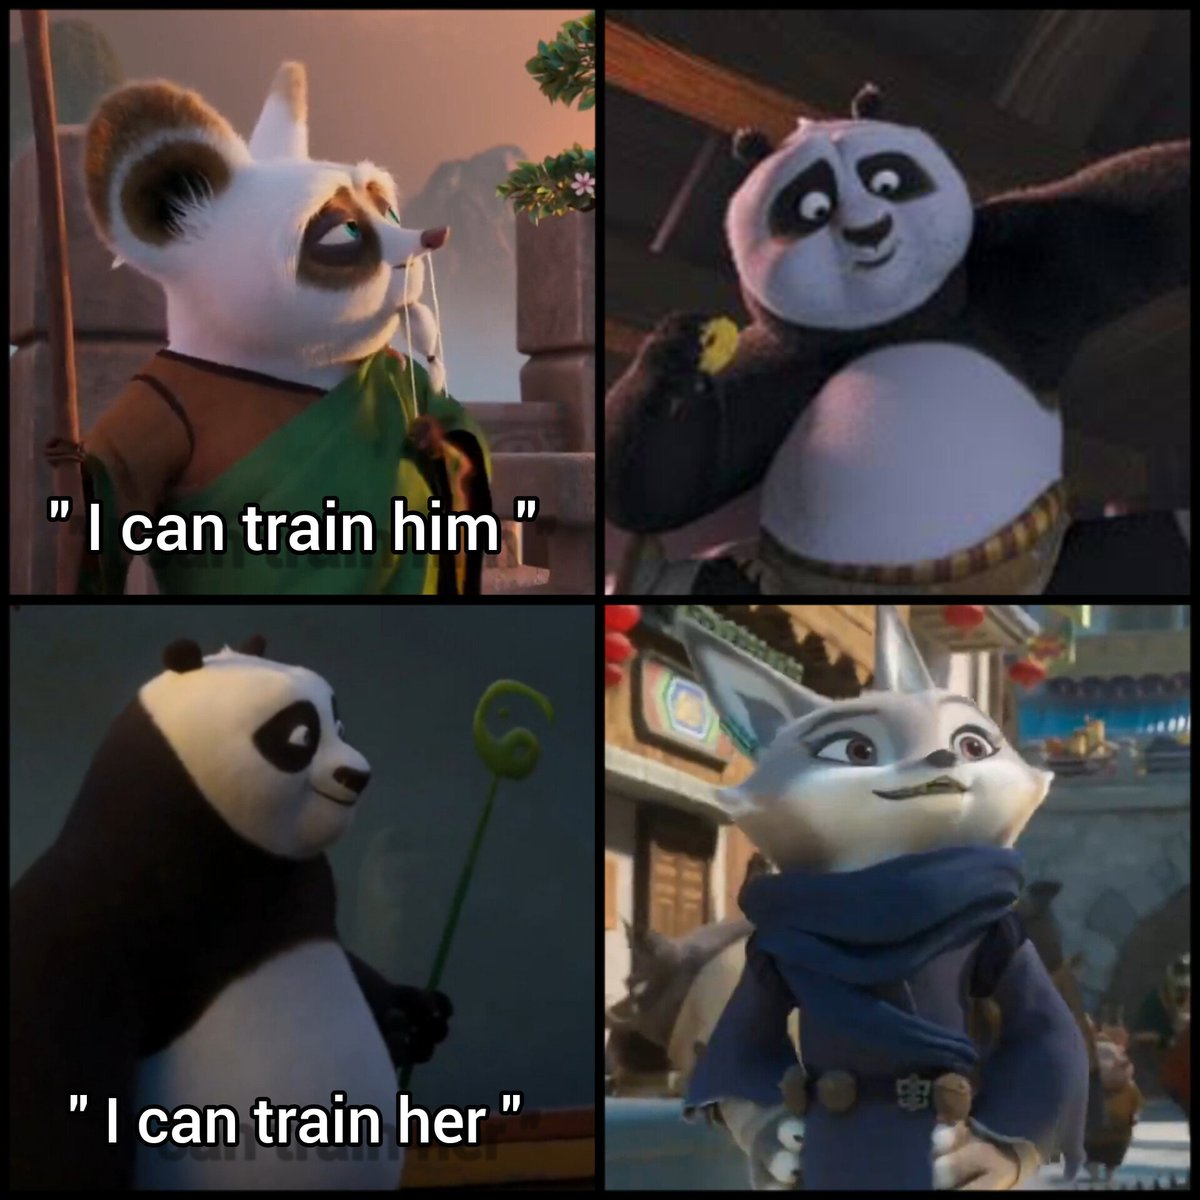 WE NEED A TRAINING MONTAGE OF THEM Y'ALL WHO'S WITH ME? 🗣️‼️🗣️‼️🗣️‼️

#KungFuPanda4 #Po #Zhen #shifu 💙